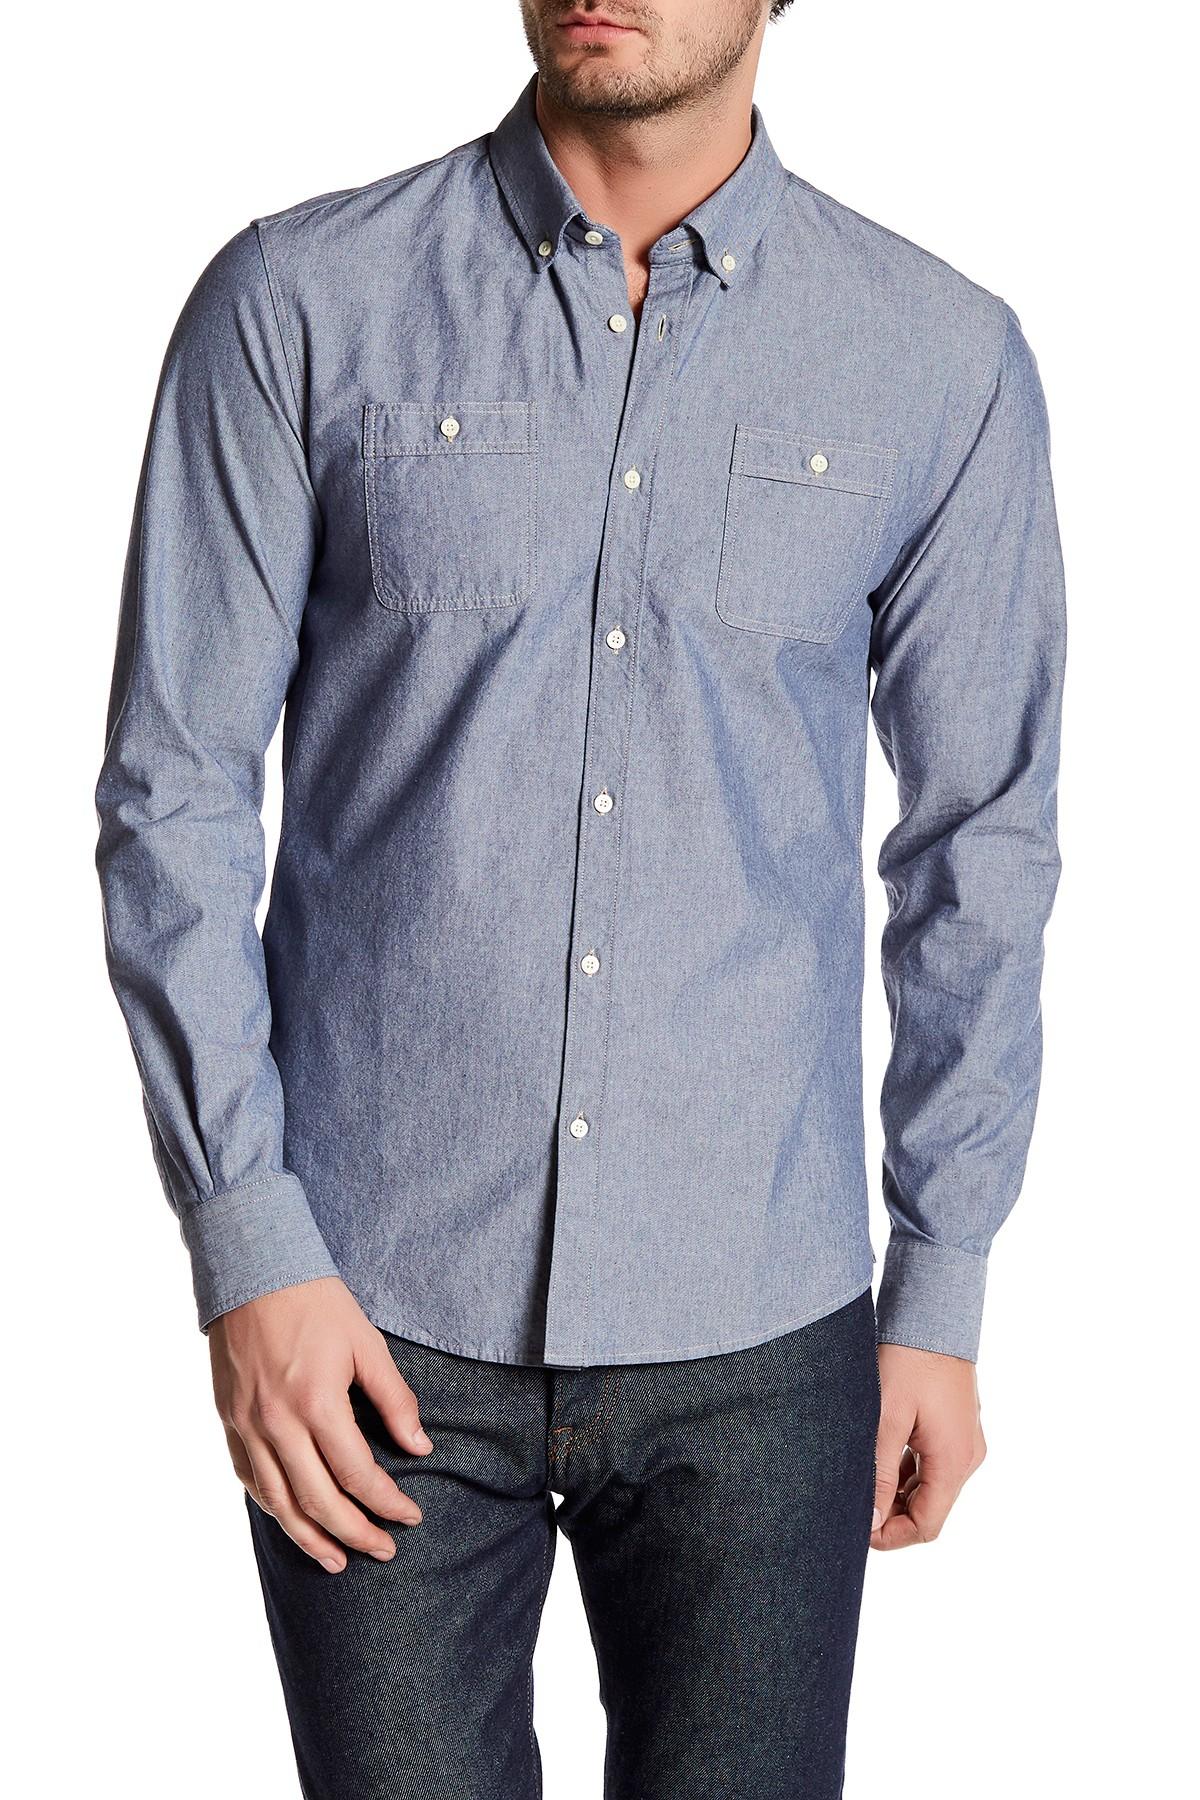 Lyst - Woolrich Long Sleeve Fitted Chambray Shirt in Blue for Men